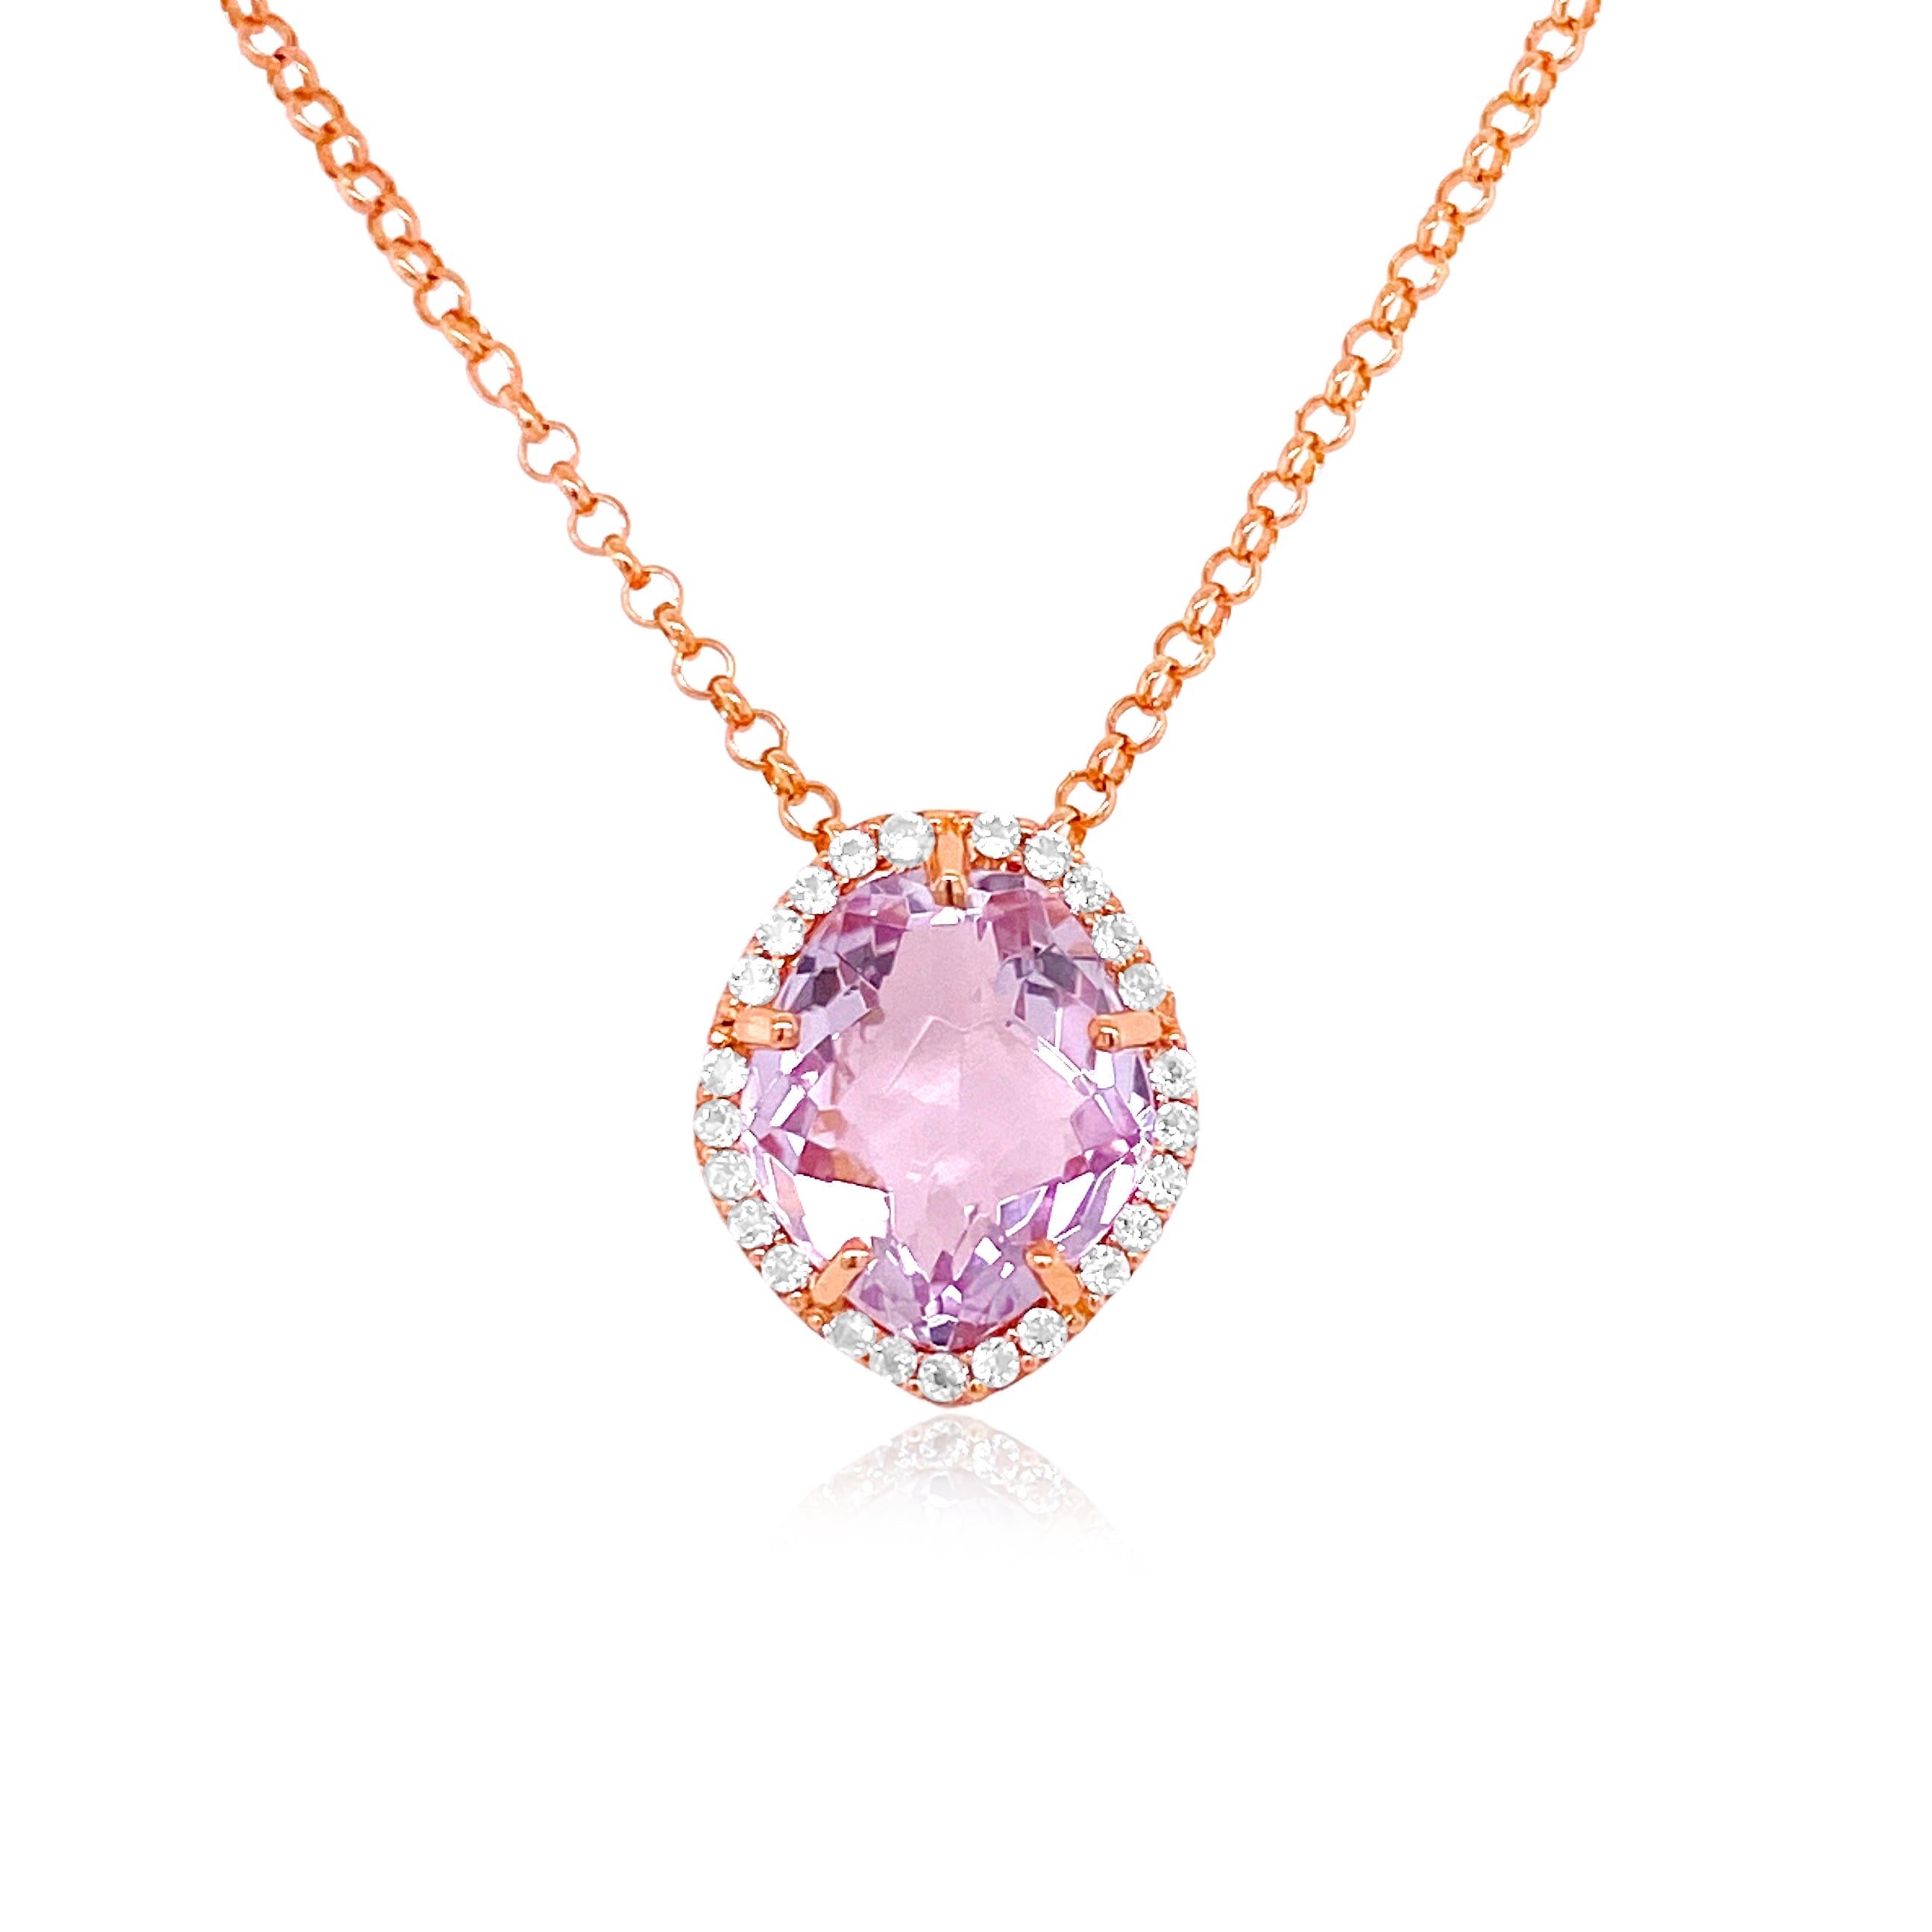 PANORAMA Necklace (1260) - Pink Amethyst / RG